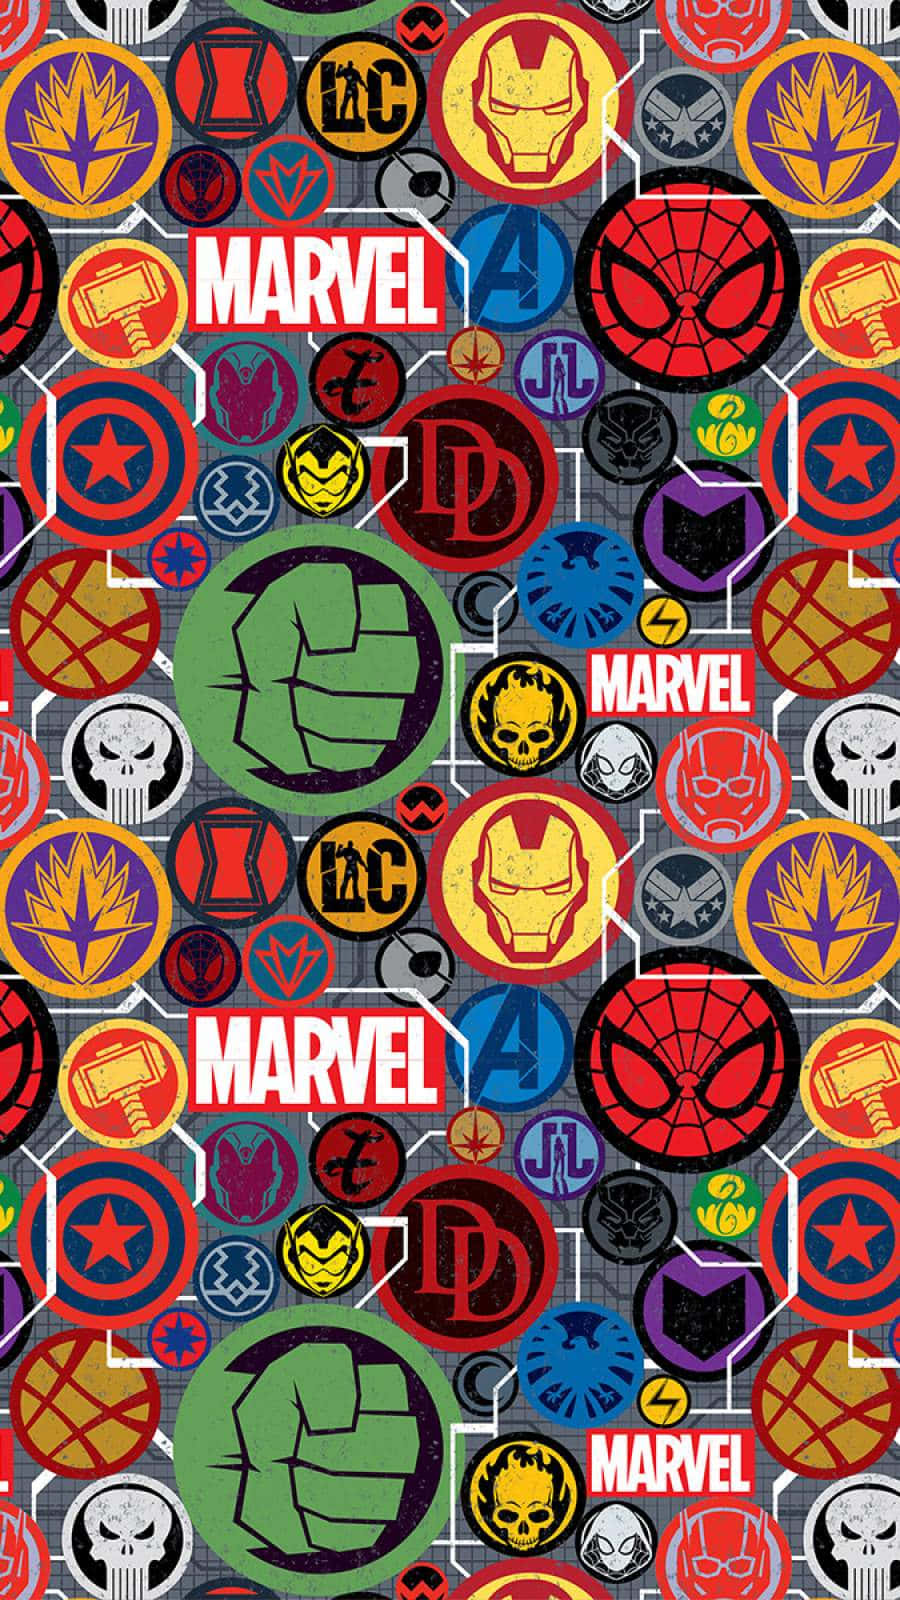 Marvel Art Iphone brings together the power and style of two iconic cultures. Wallpaper